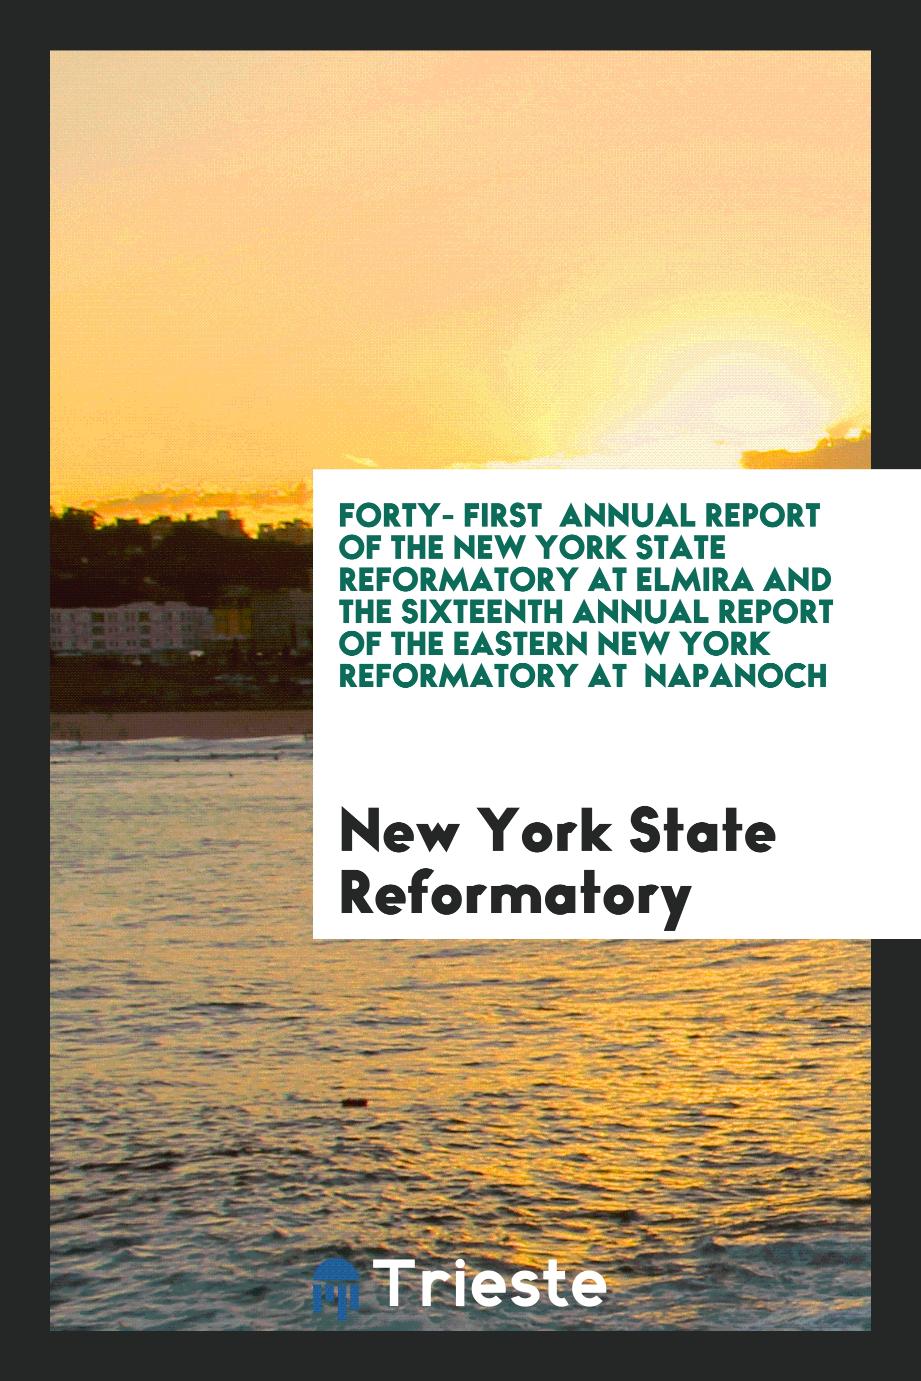 Forty- First Annual Report of the New York State Reformatory at Elmira and the Sixteenth Annual Report of the Eastern New York Reformatory at Napanoch